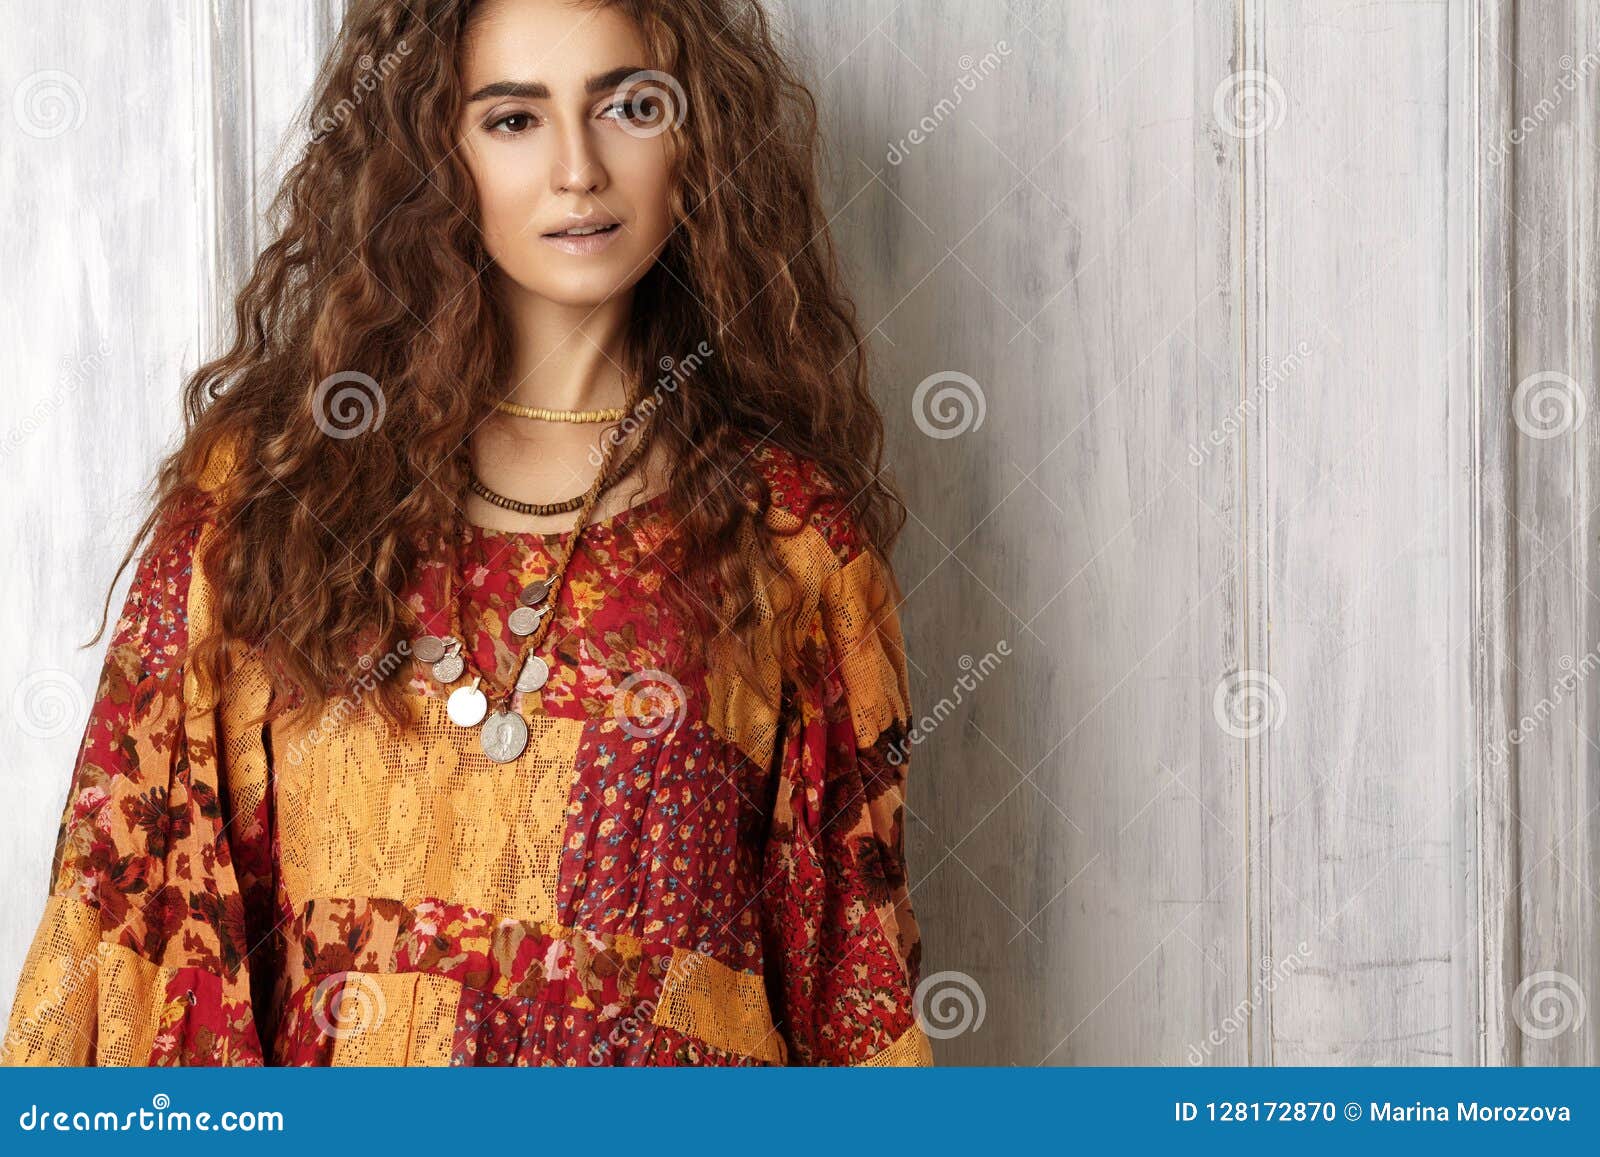 beautiful young woman with long curly hairstyle, fashion